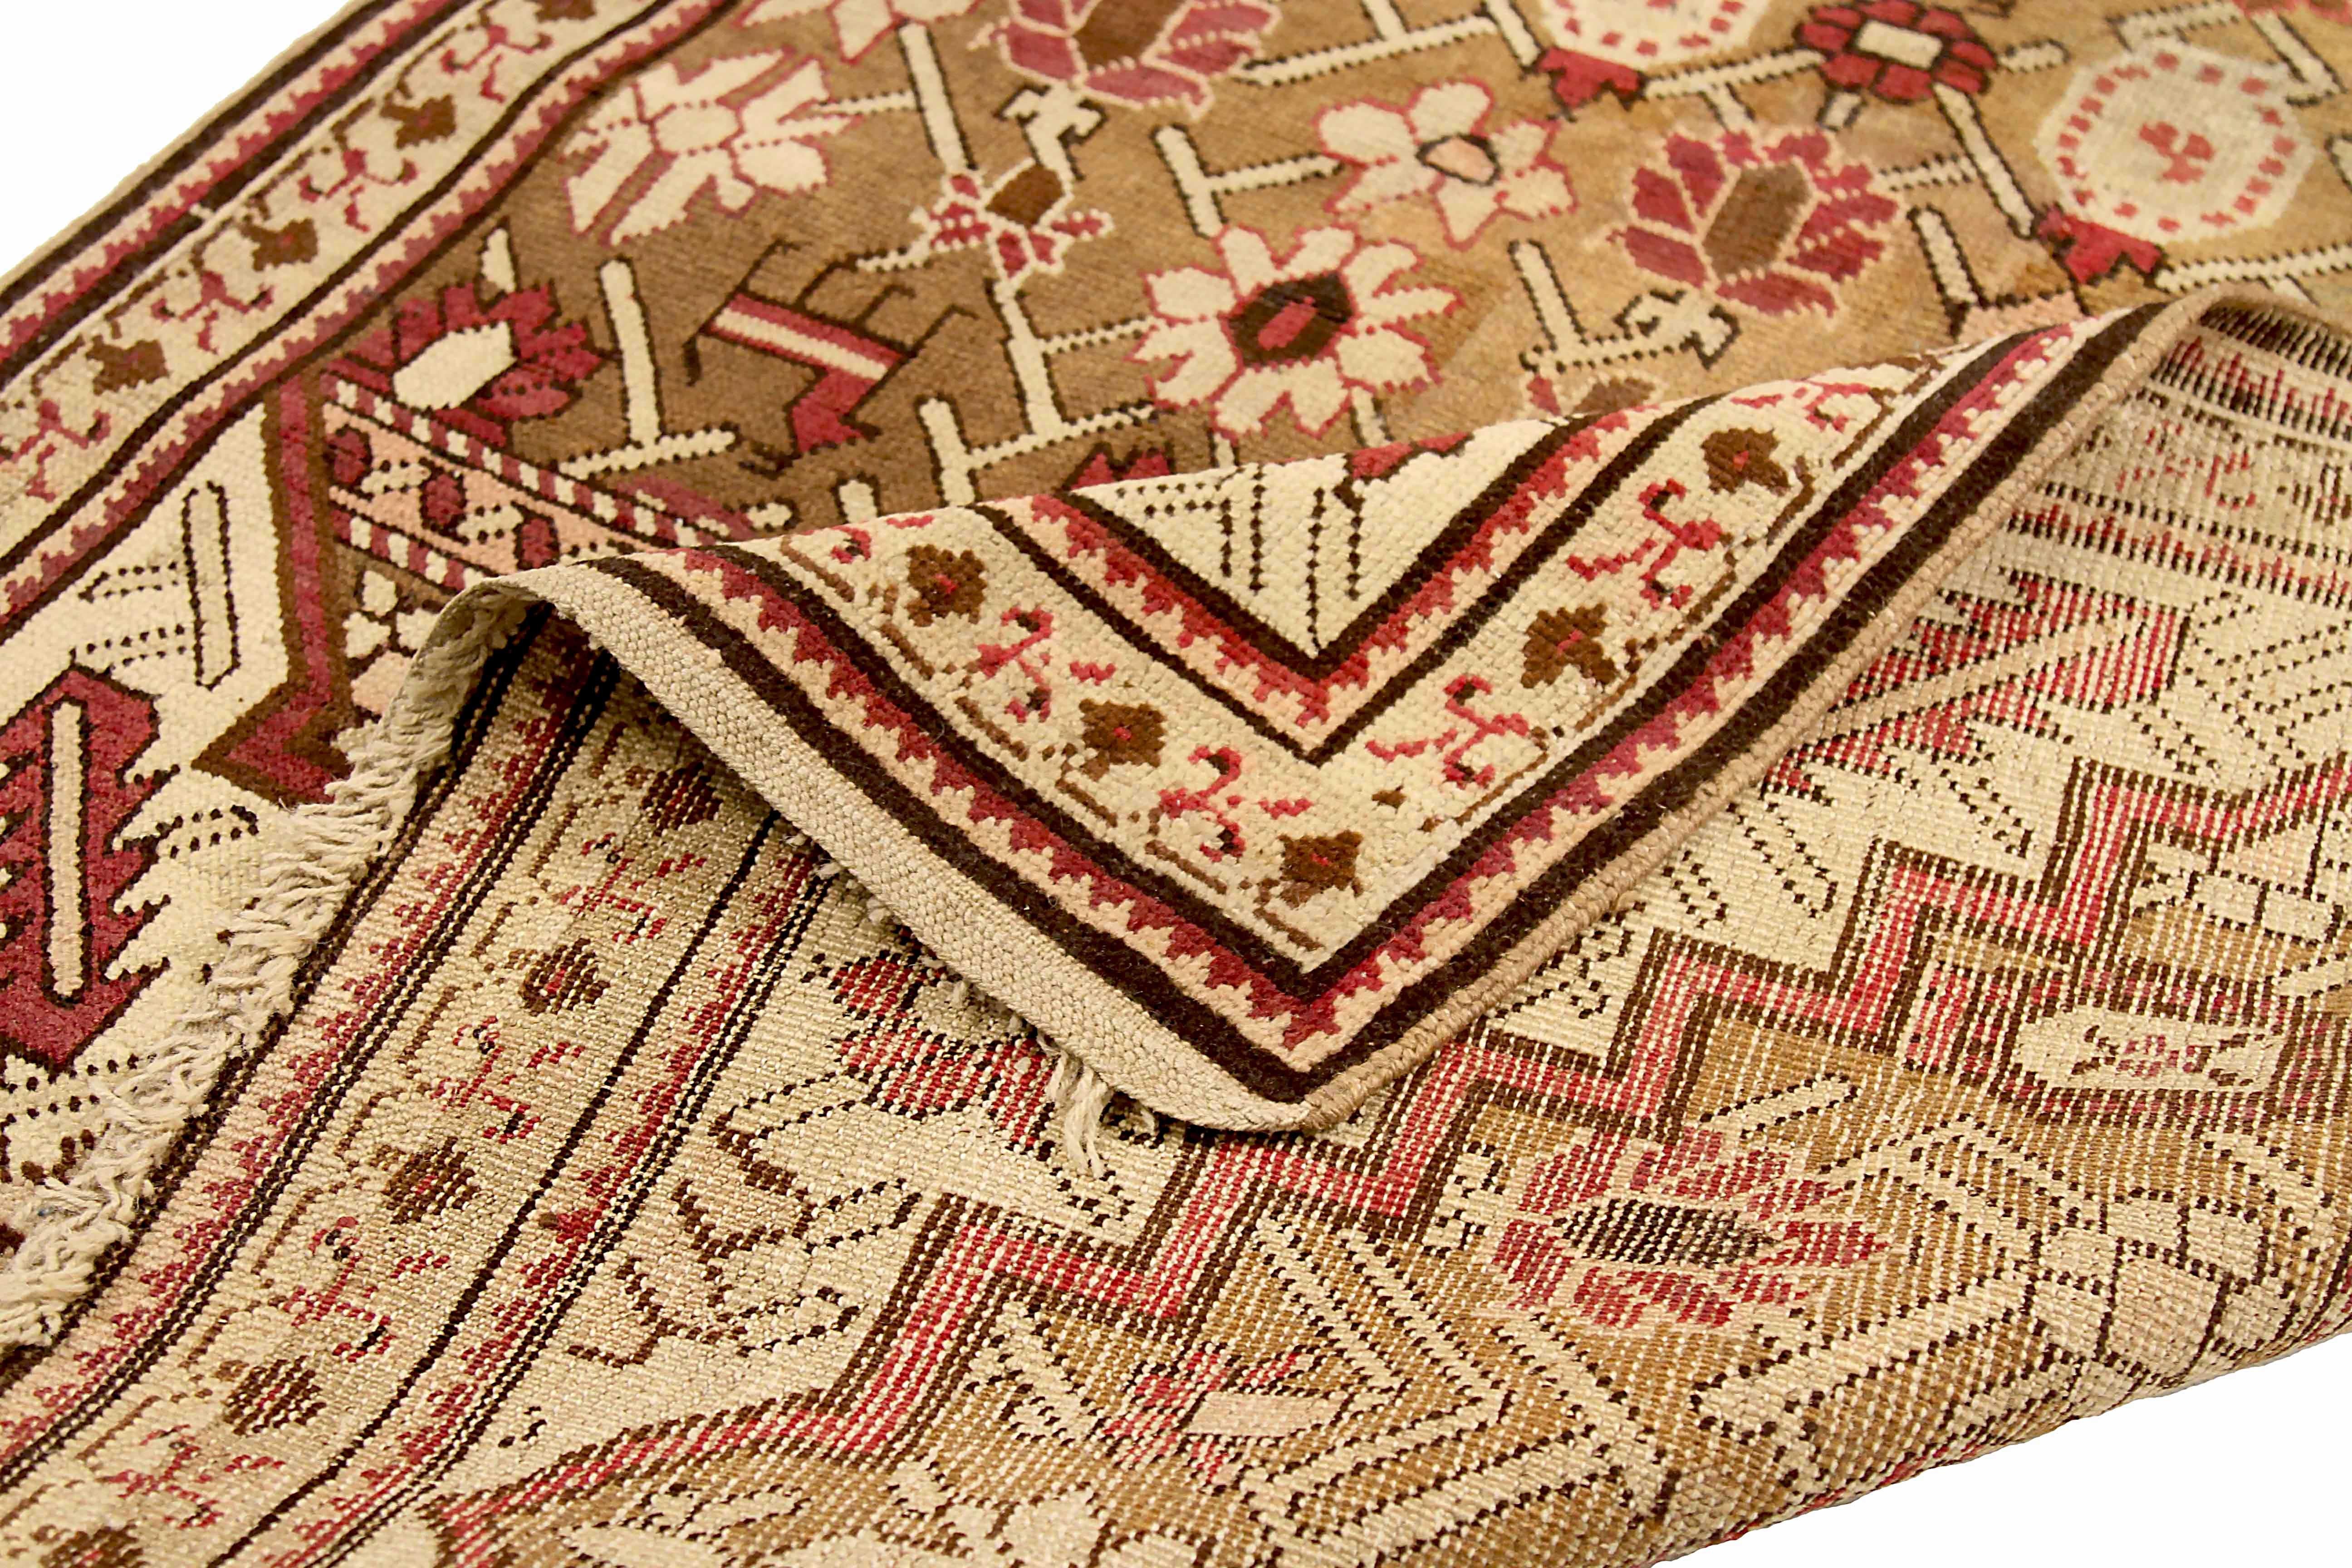 Hand-Woven Antique Russian Area Rug Karebagh Design For Sale